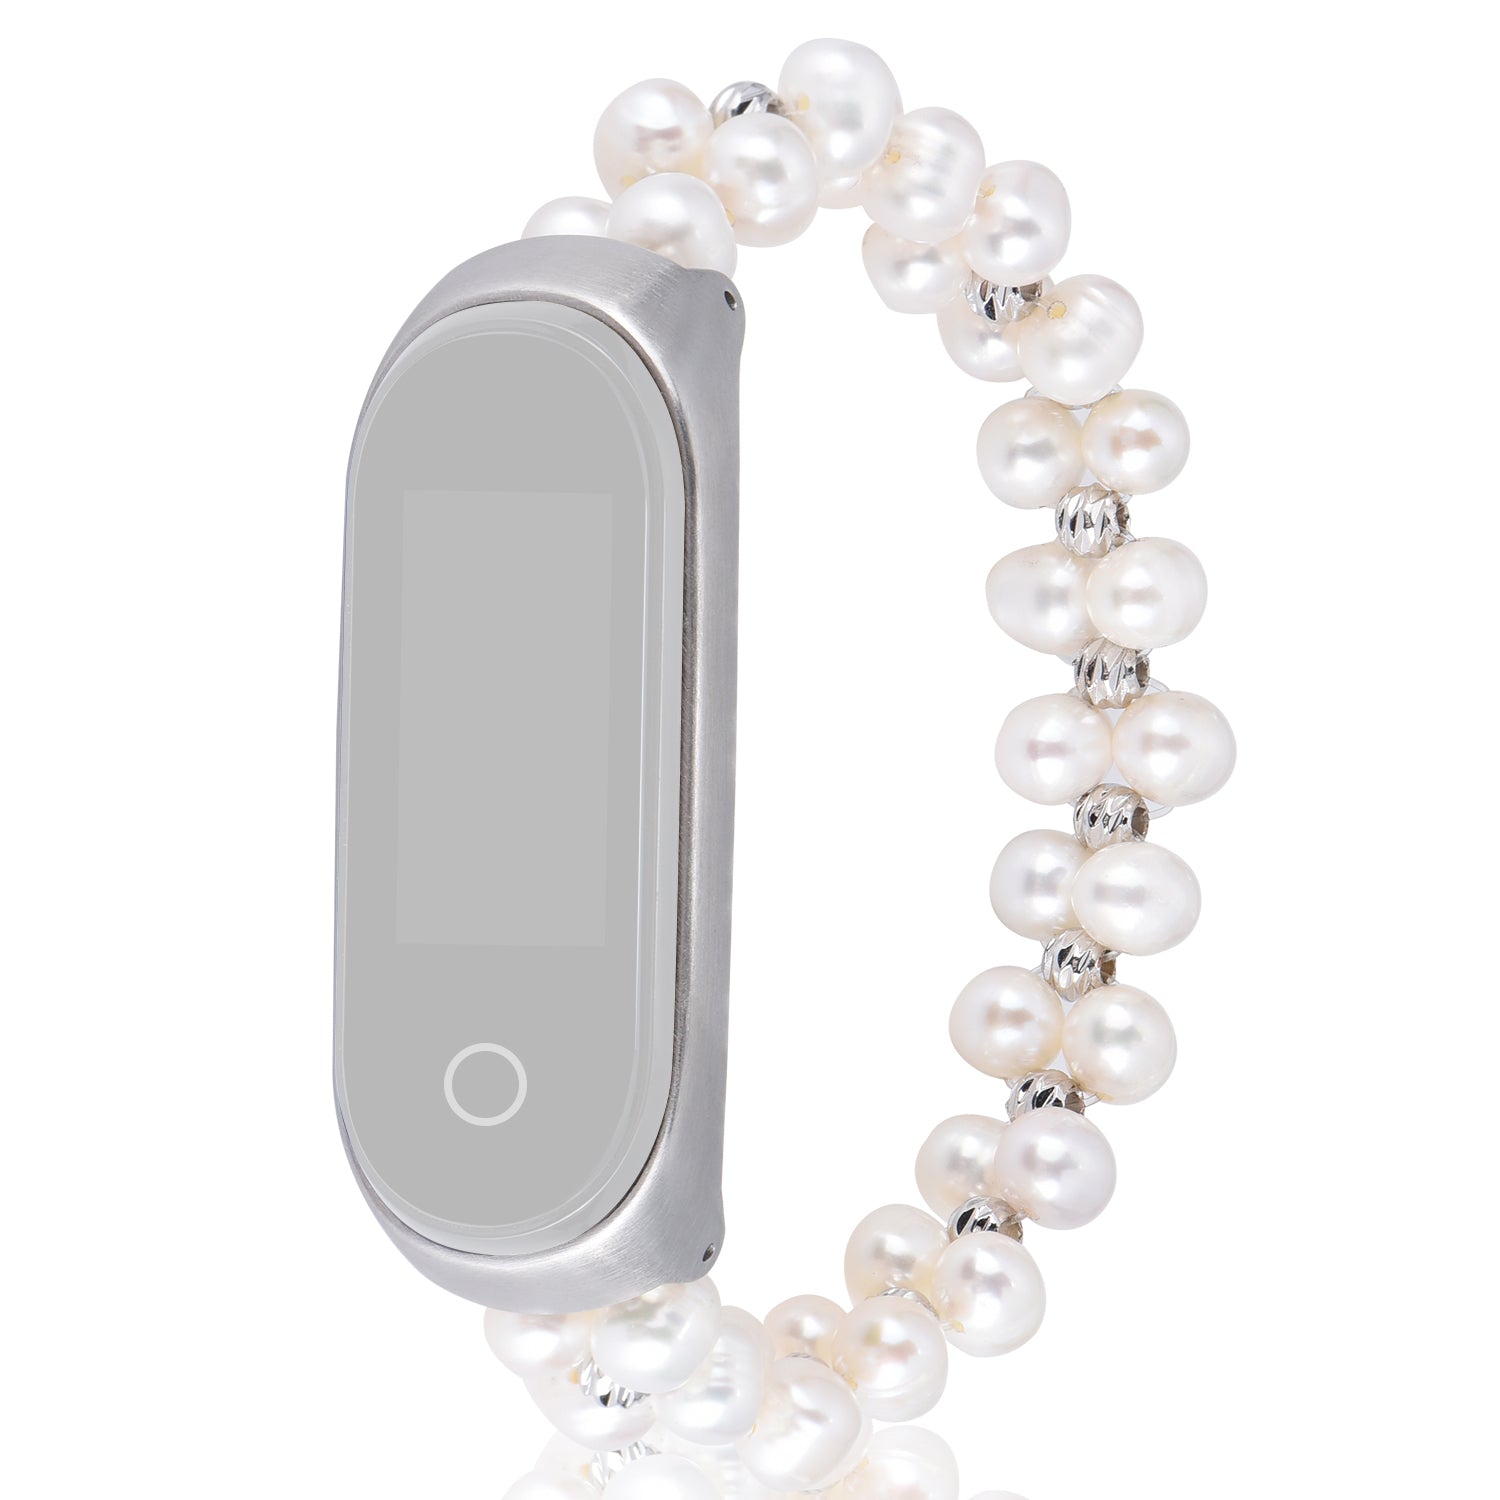 For Xiaomi Mi Band 5/6 Pearls Bracelet Smart Watch Band Replacement Wrist Strap - White